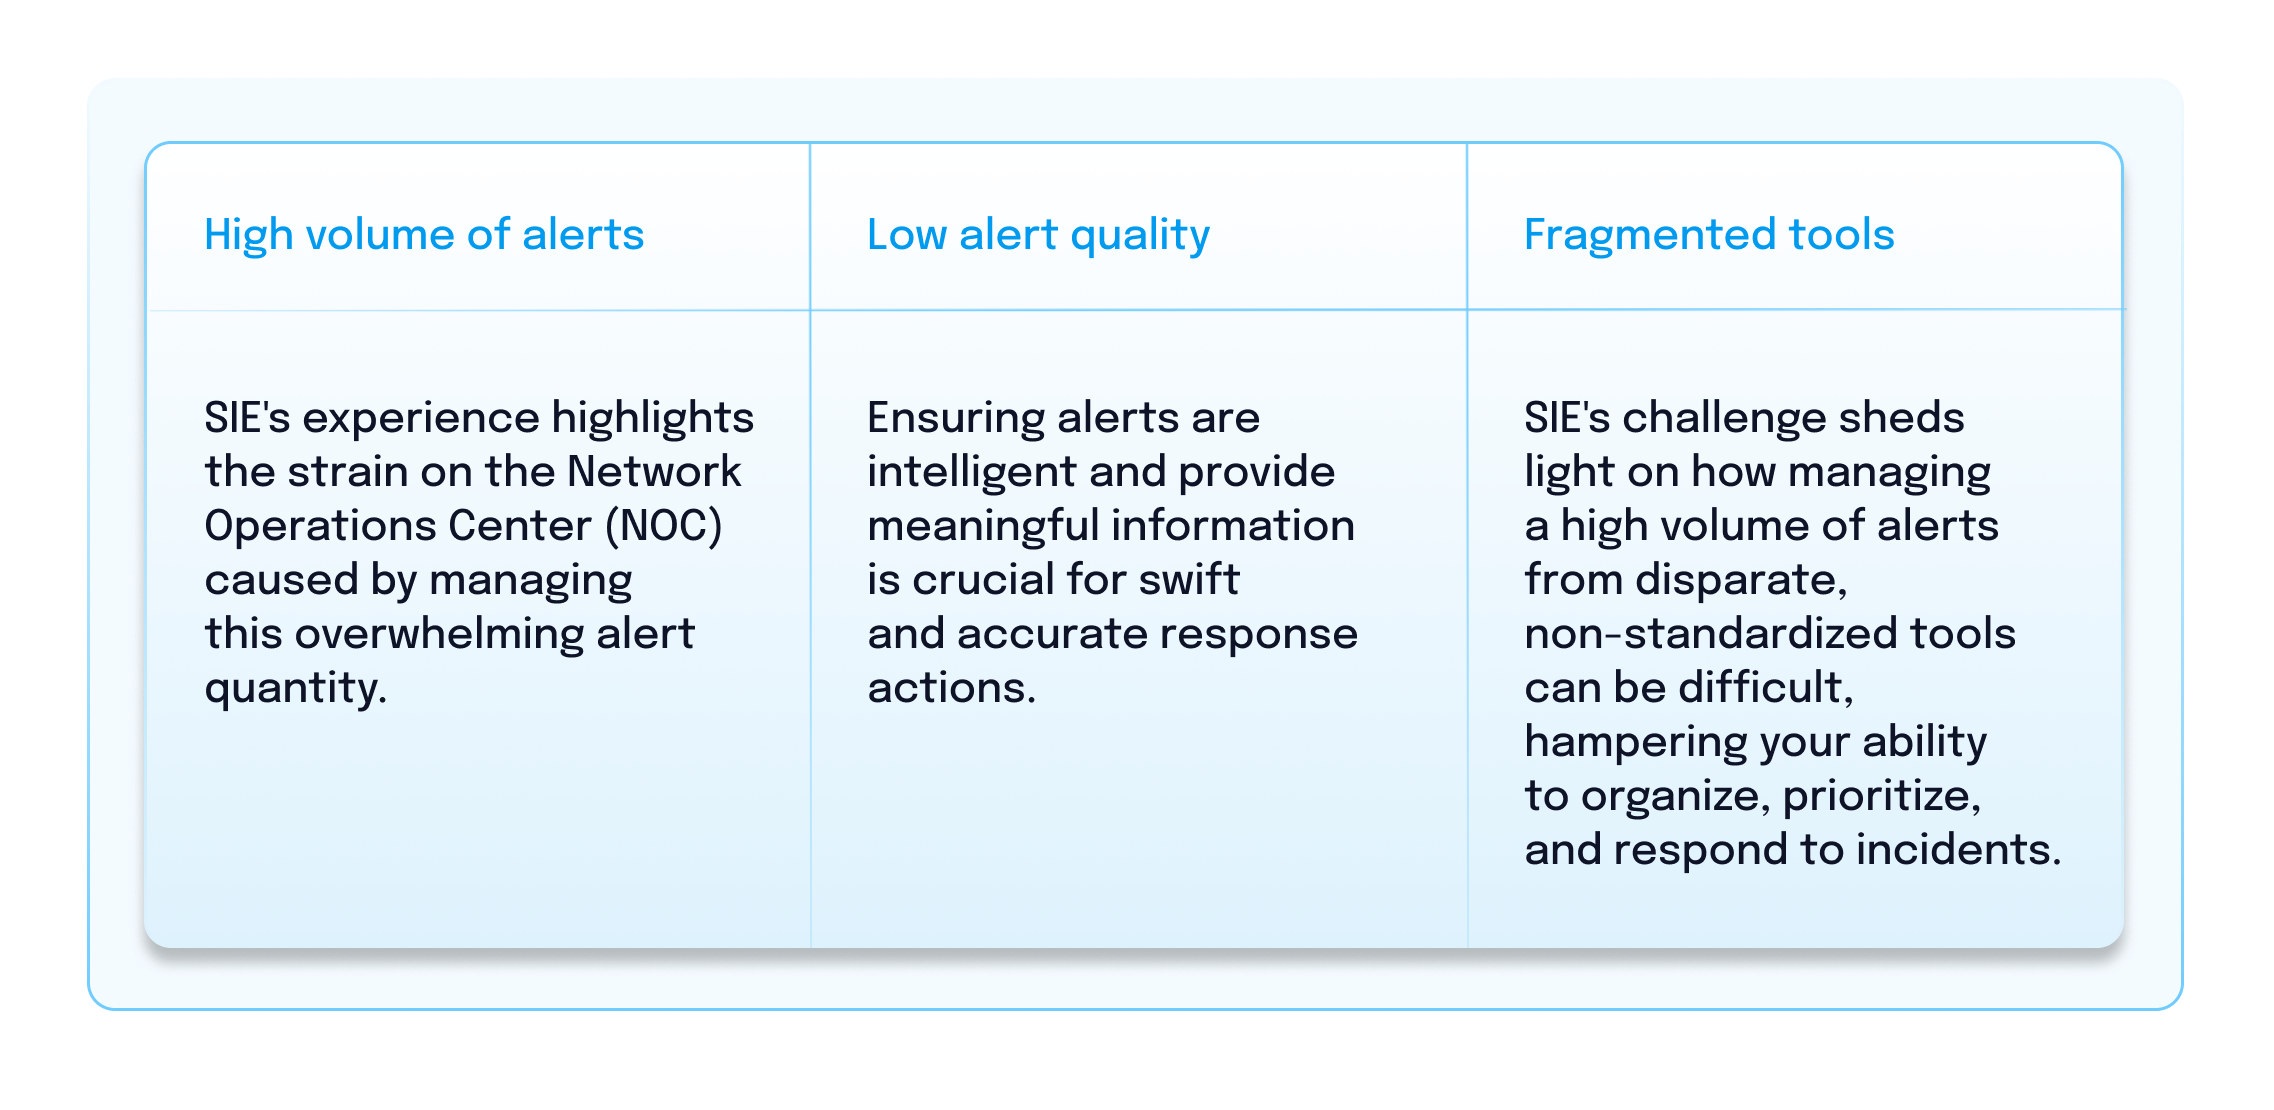 High volume of alerts: SIE's experience highlights the strain on the Network Operations Center (NOC) caused by managing this overwhelming alert quantity.; Low alert quality: Ensuring alerts are intelligent and provide meaningful information is crucial for swift and accurate response actions.; Fragmented tools: SIE's challenge sheds light on how managing a high volume of alerts from disparate, non-standardized tools can be difficult, hampering your ability to organize, prioritize, and respond to incidents.